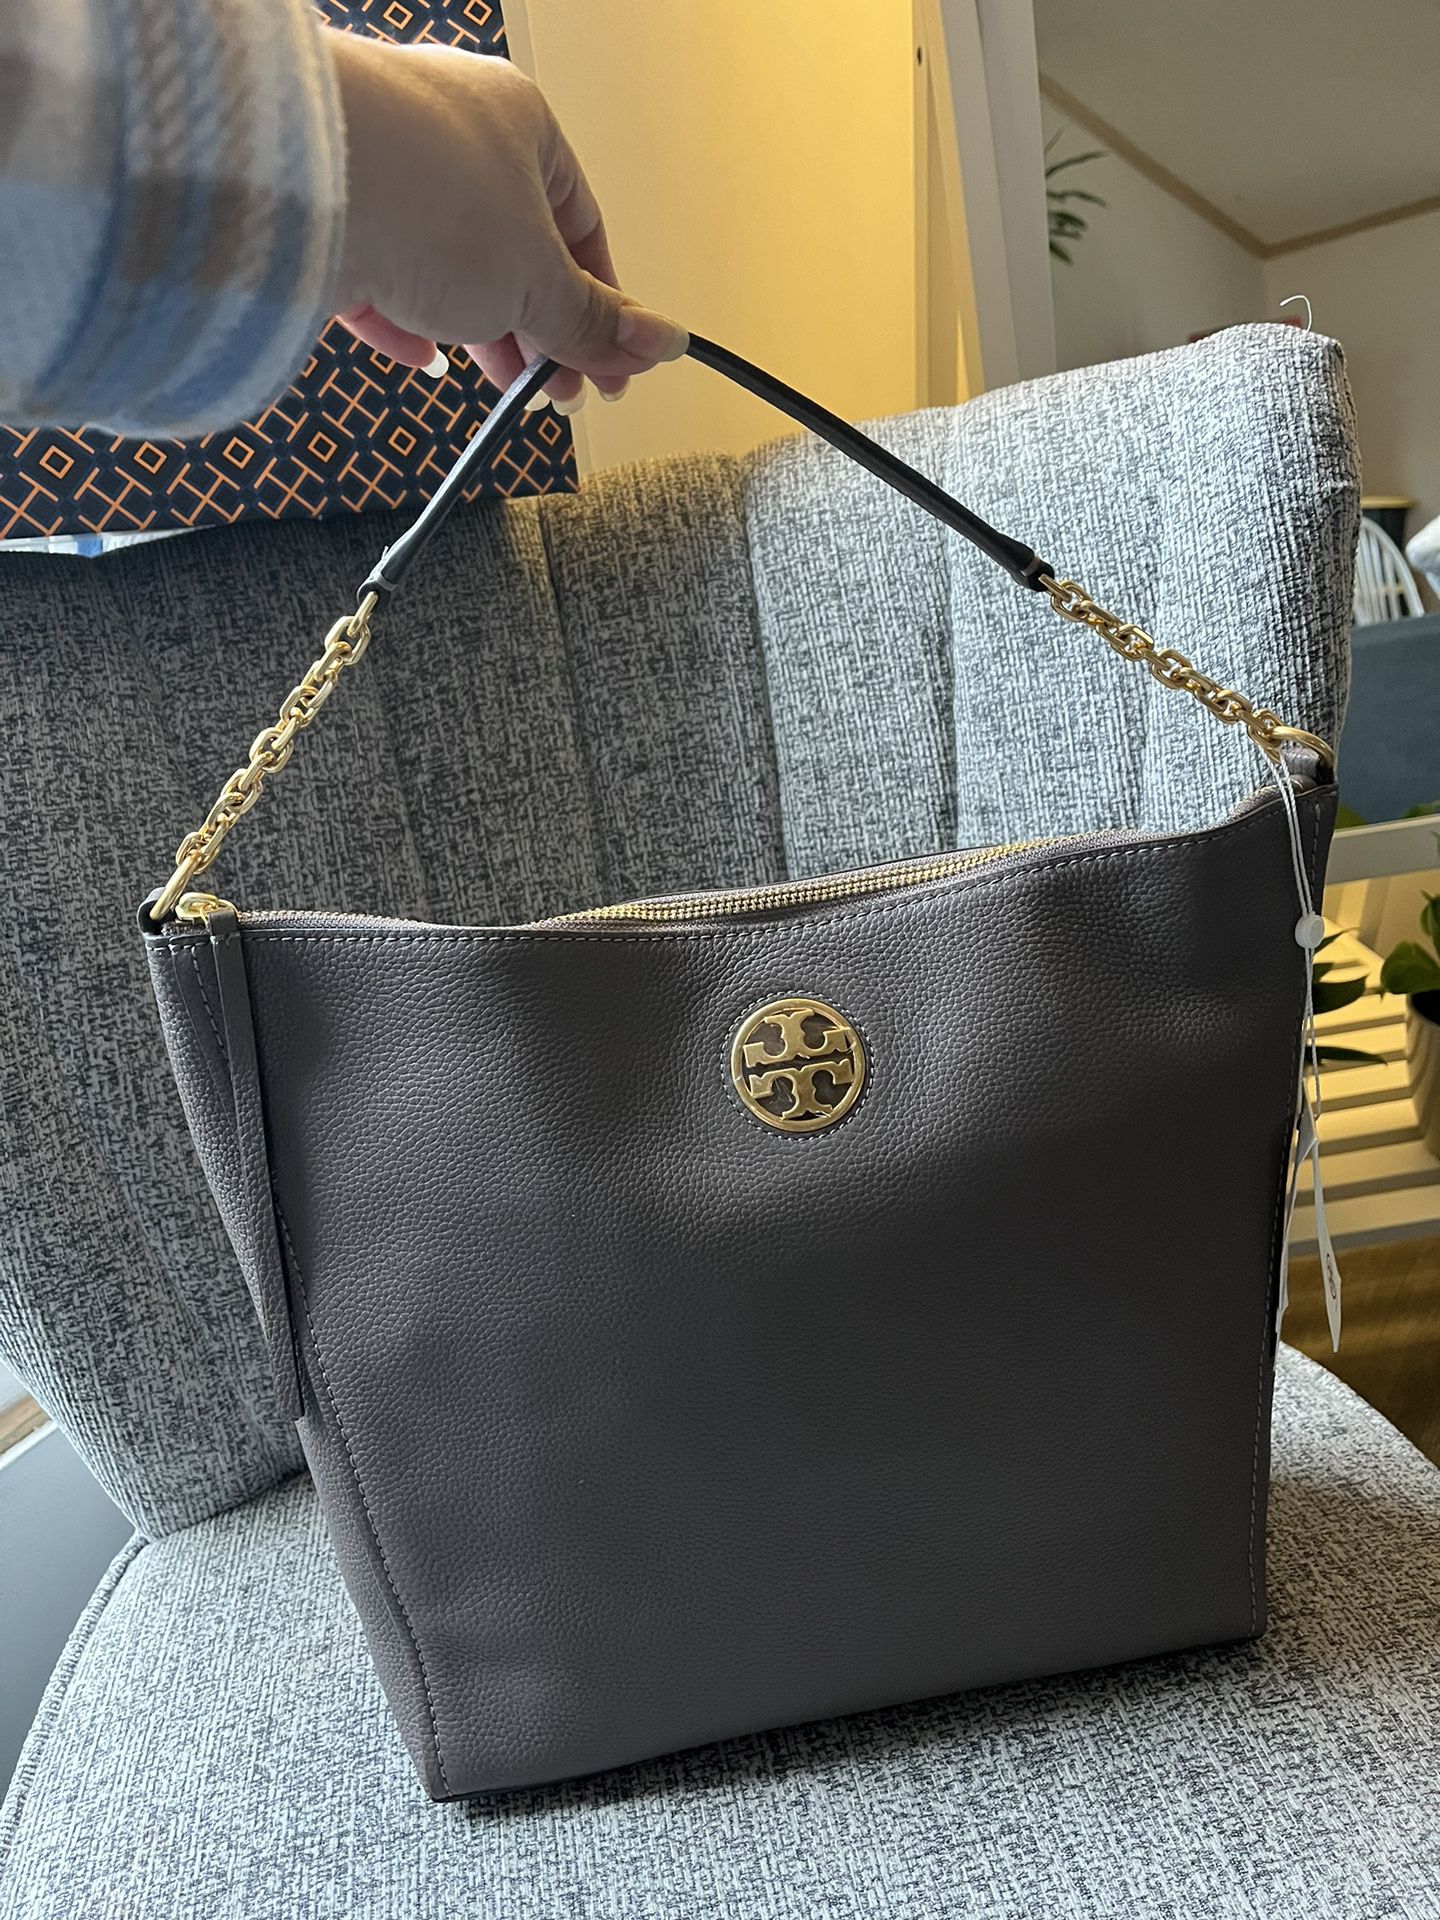 New Tory Burch Carson Bag for Sale in Santa Ana, CA - OfferUp